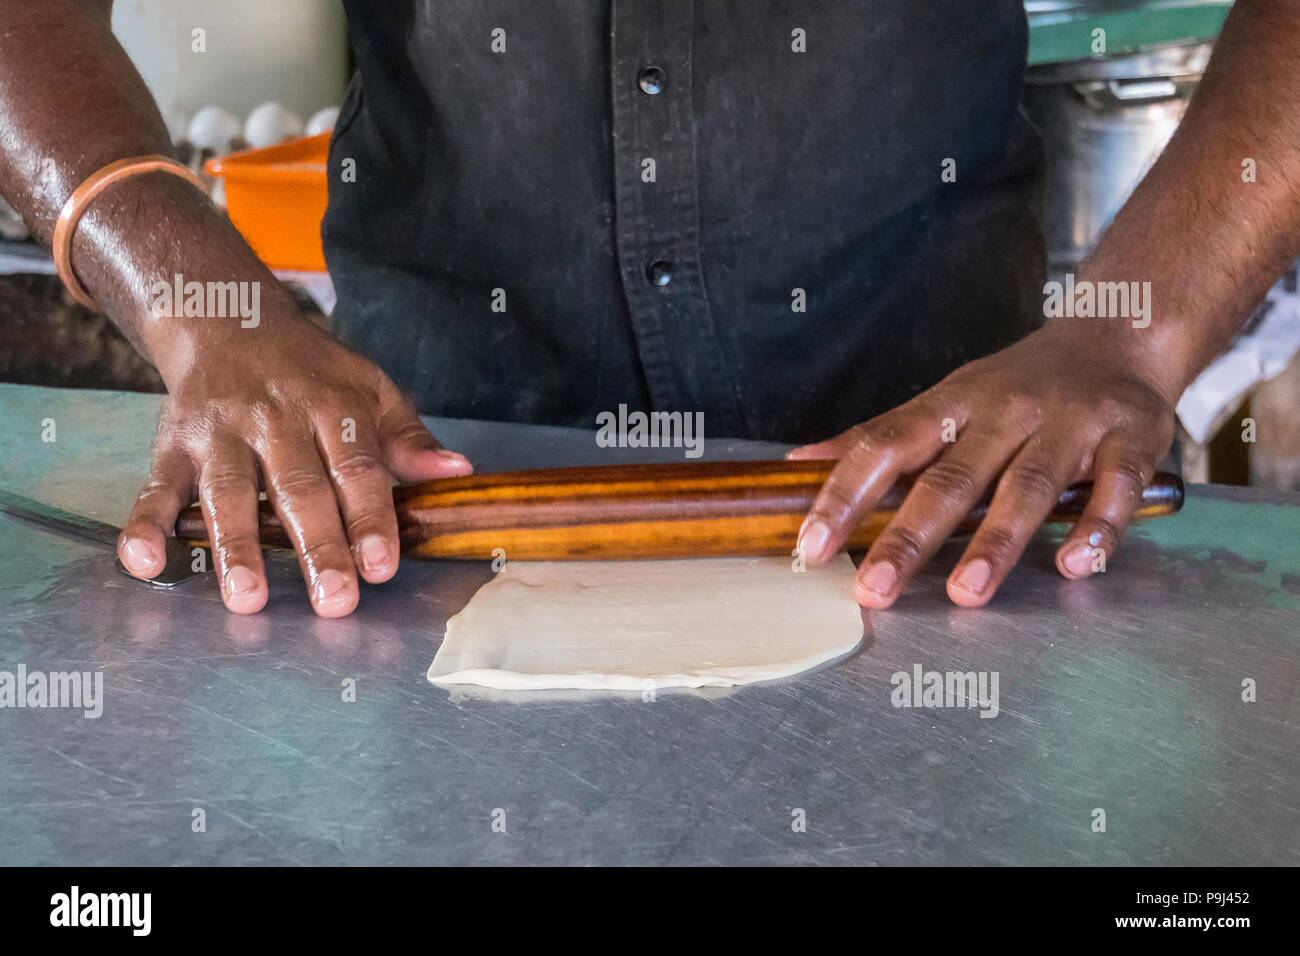 Cooking dough for baking in the kitchen, ready-made pies for baking, chef's hands prepare dough for making pies, rolls dough with a rolling pin. India Stock Photo